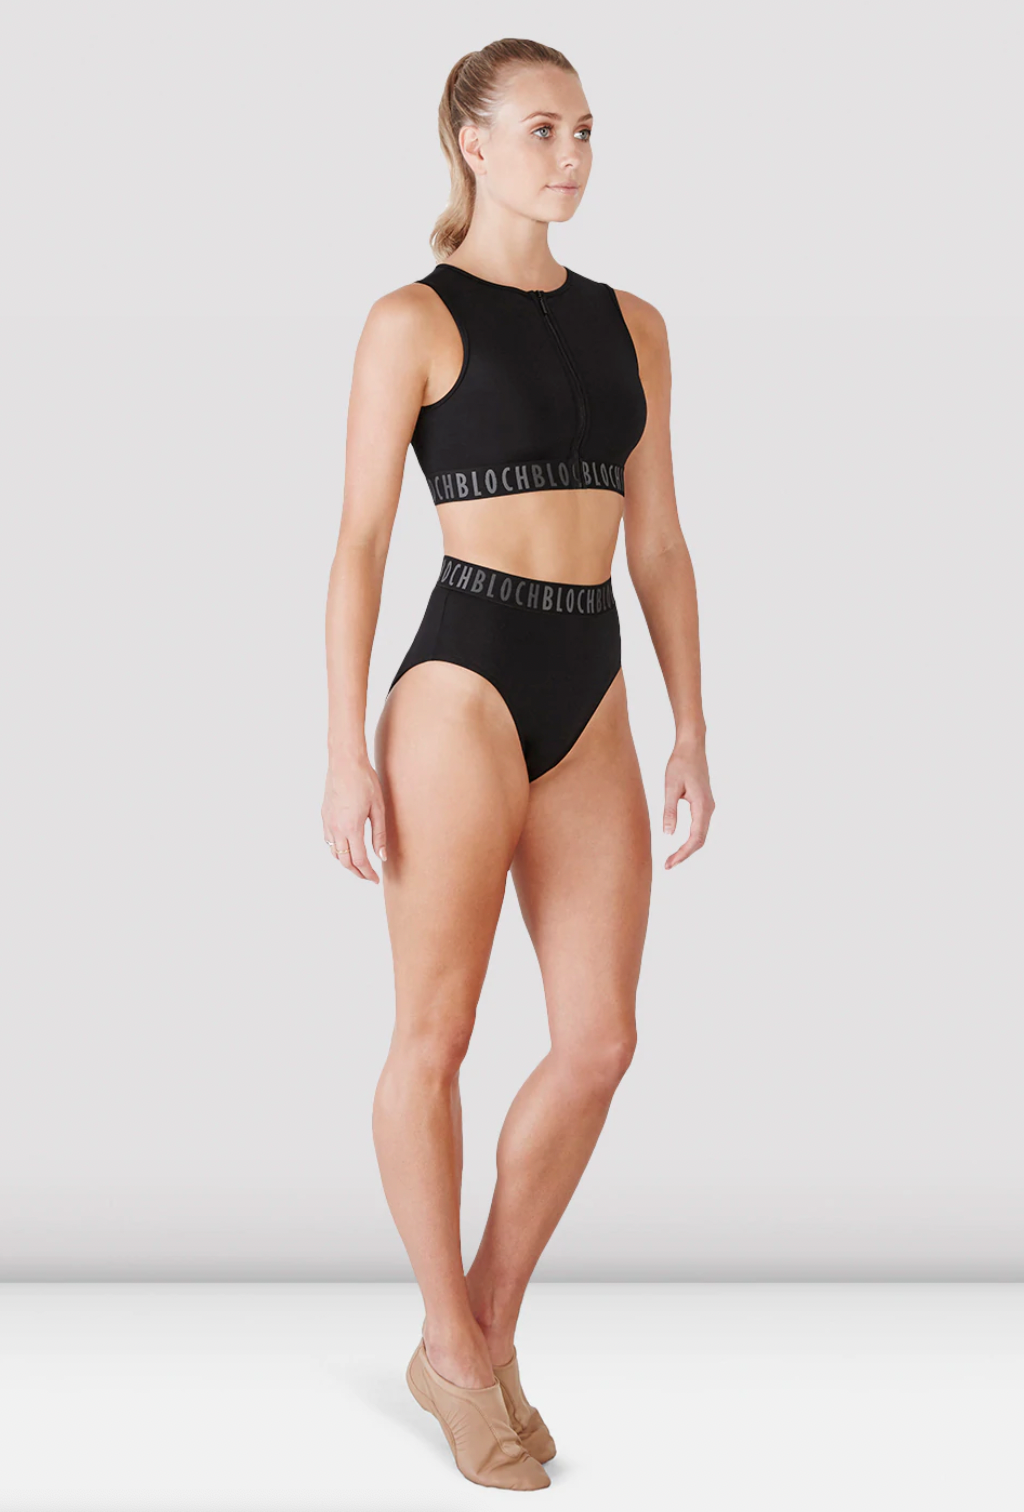 Teigan Full Coverage Briefs  dance shorts black from the collective dancewear